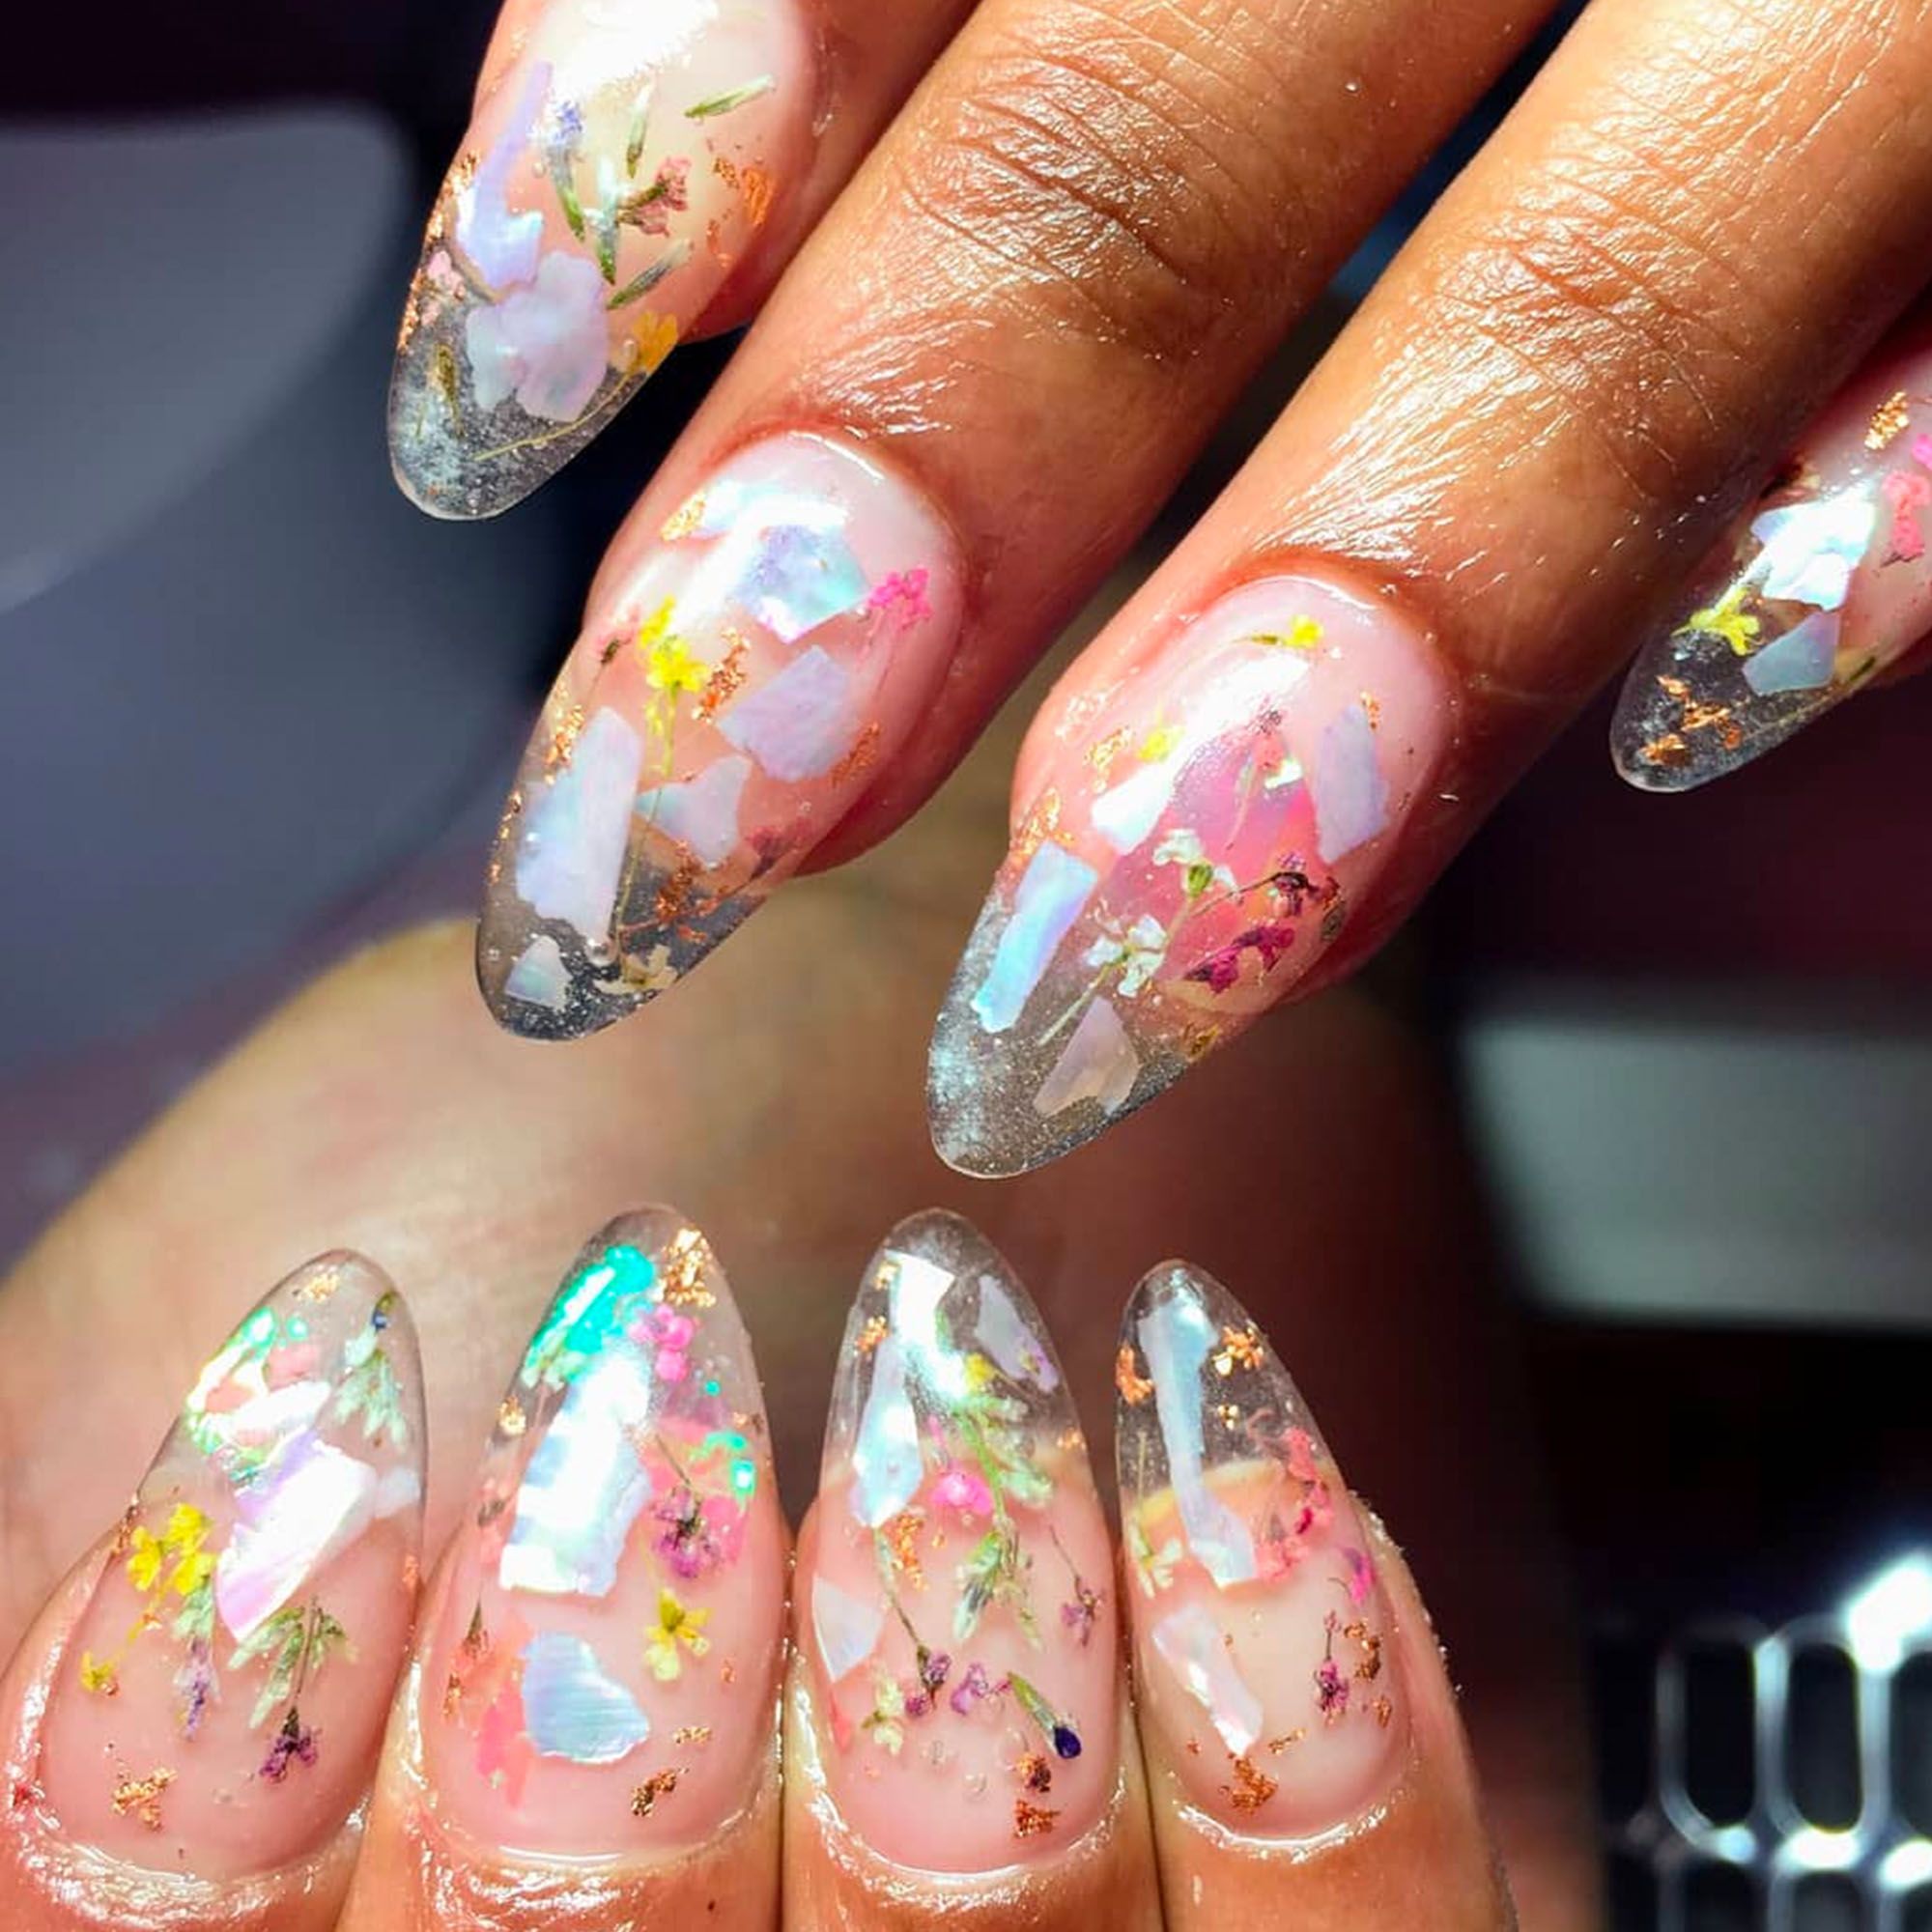 19 Spring Nail Art Designs Nail Art Ideas For Spring 2020 Manicures